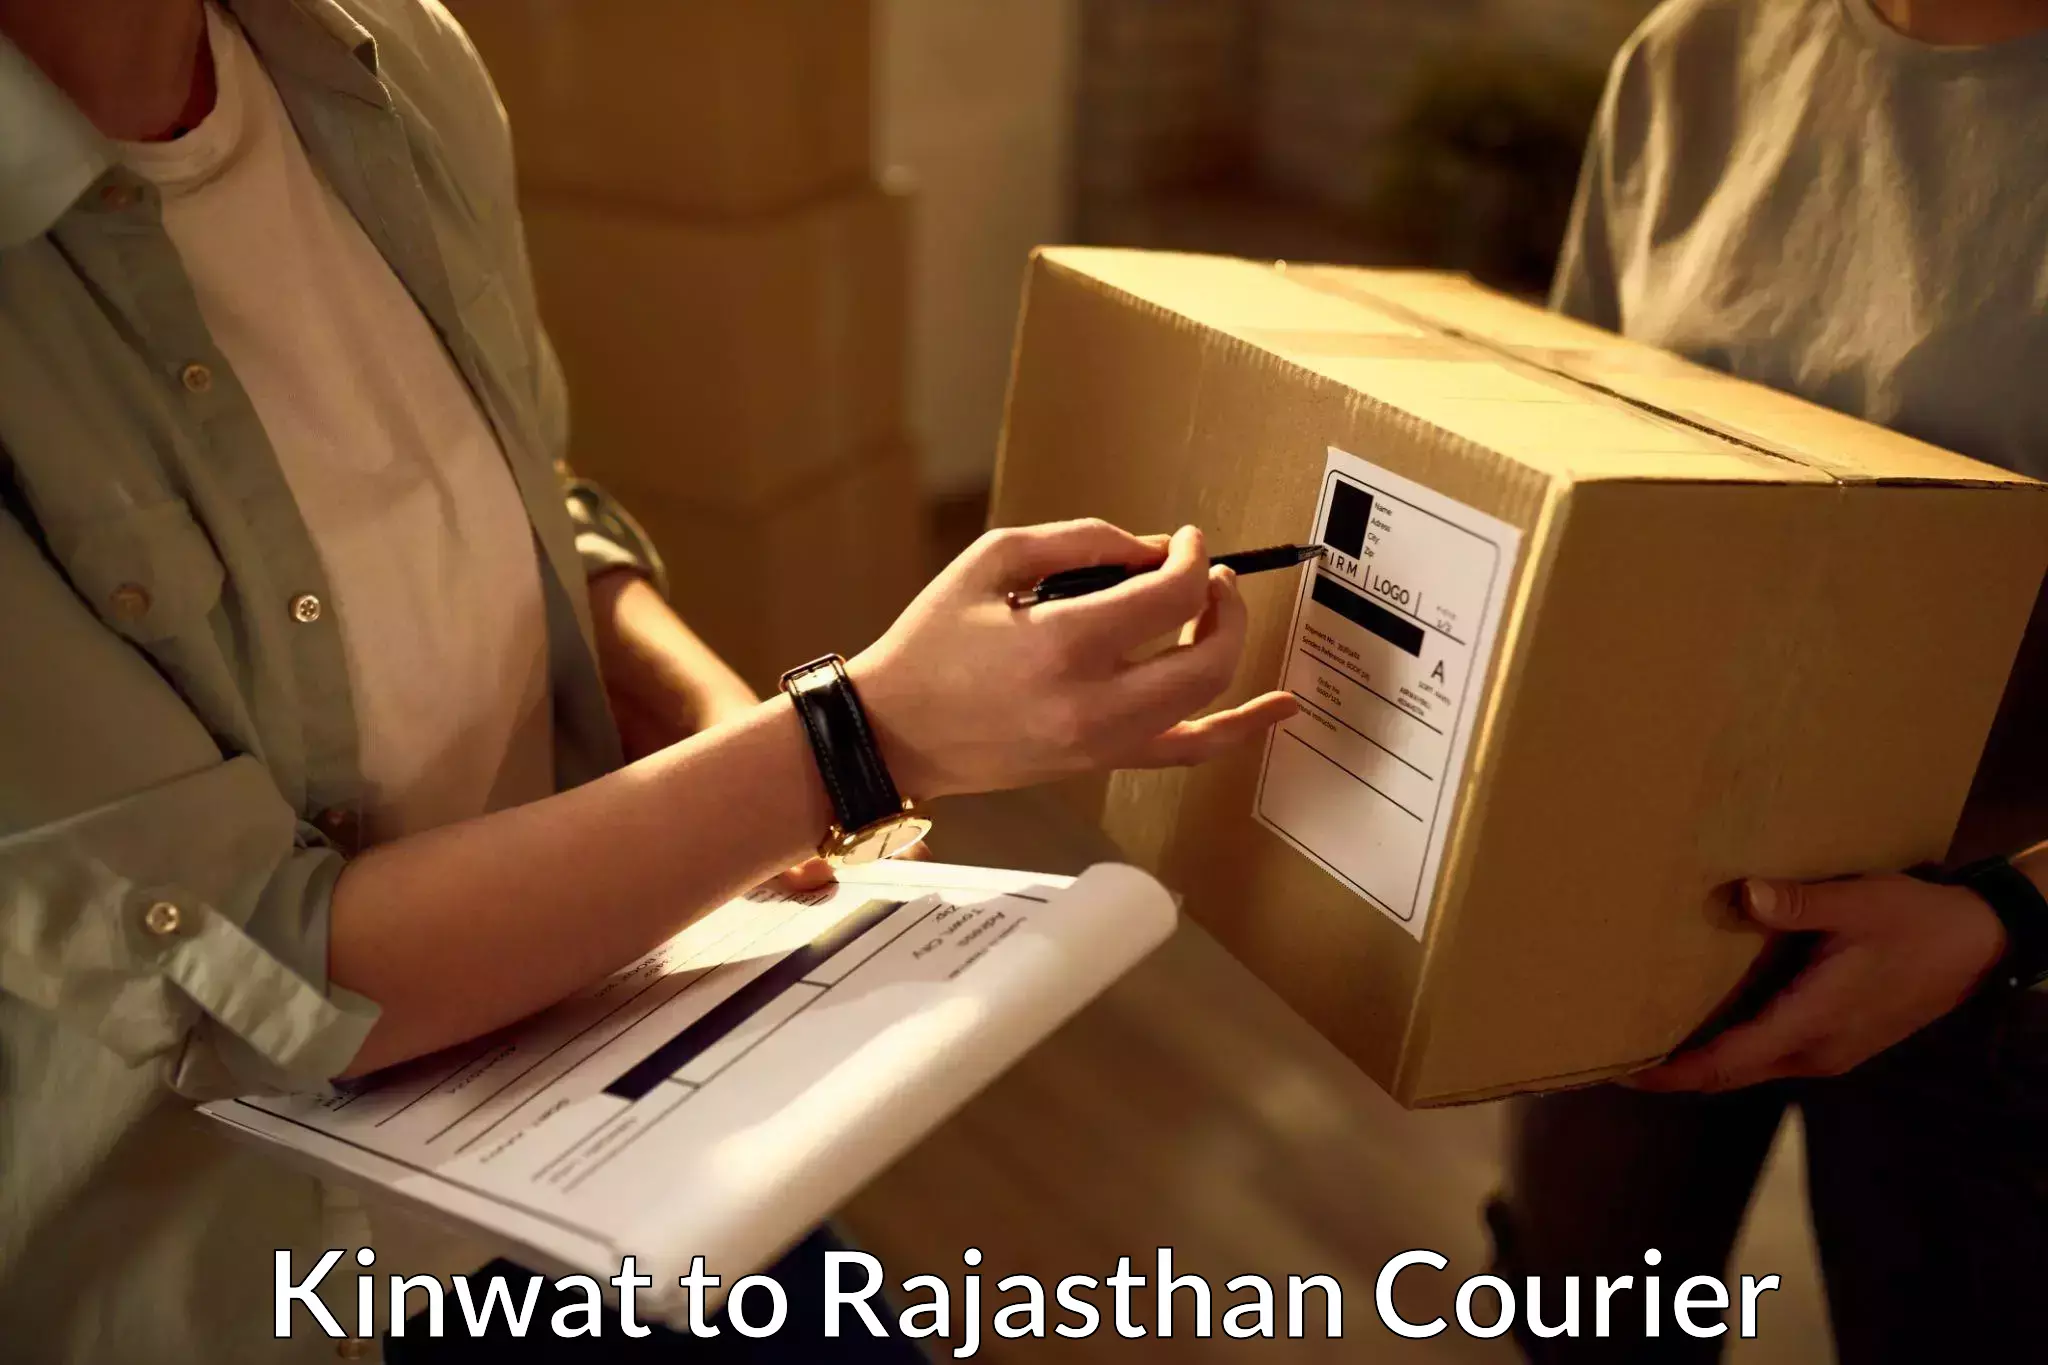 Cash on delivery service Kinwat to Banswara